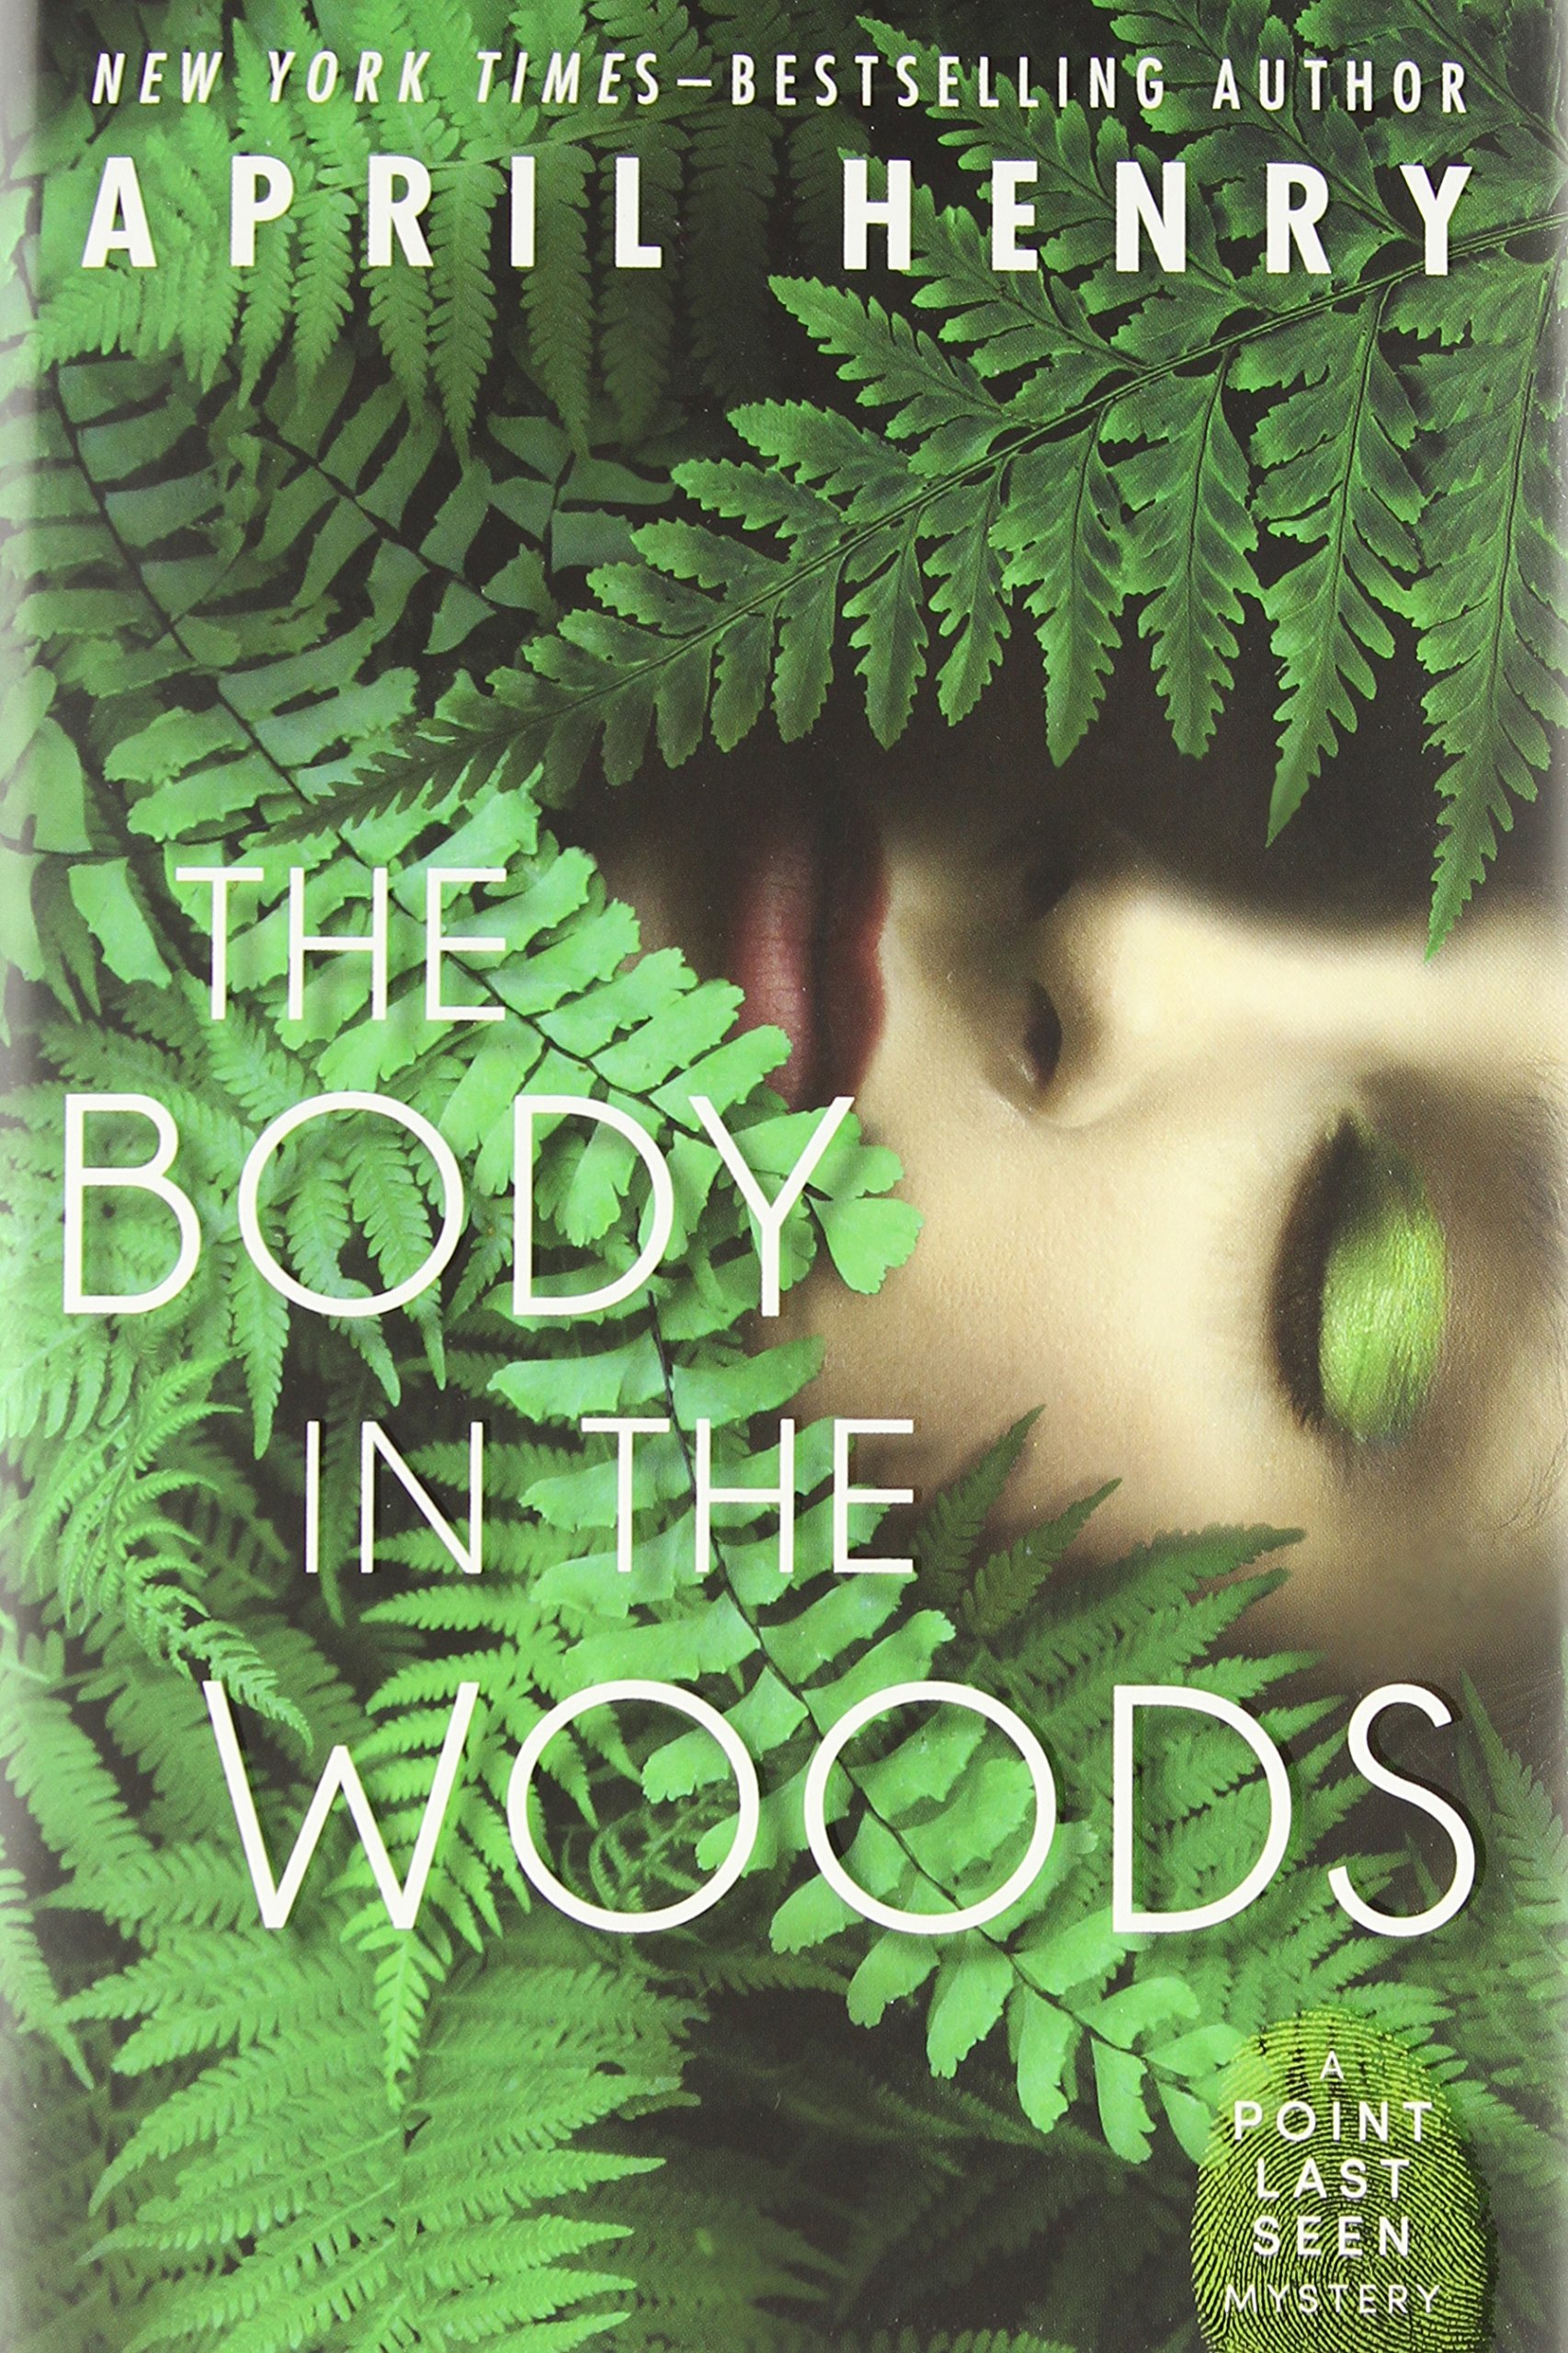 The Body in the Woods: A Point Last Seen Mystery: April Henry ...